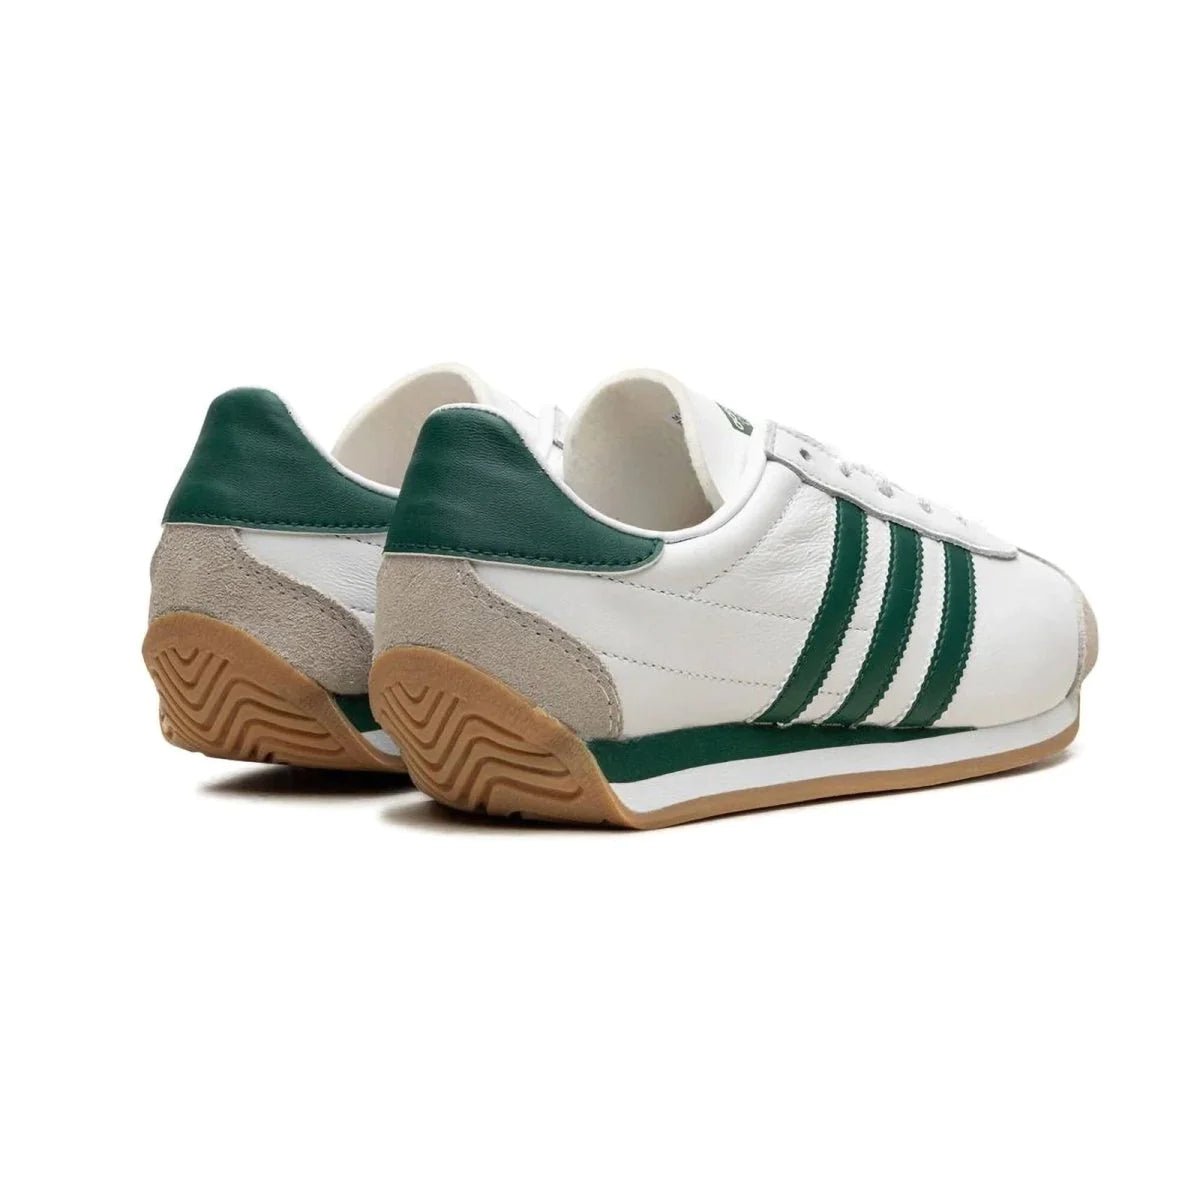 Adidas Men's Country OG White/Green - 10048992 - West NYC